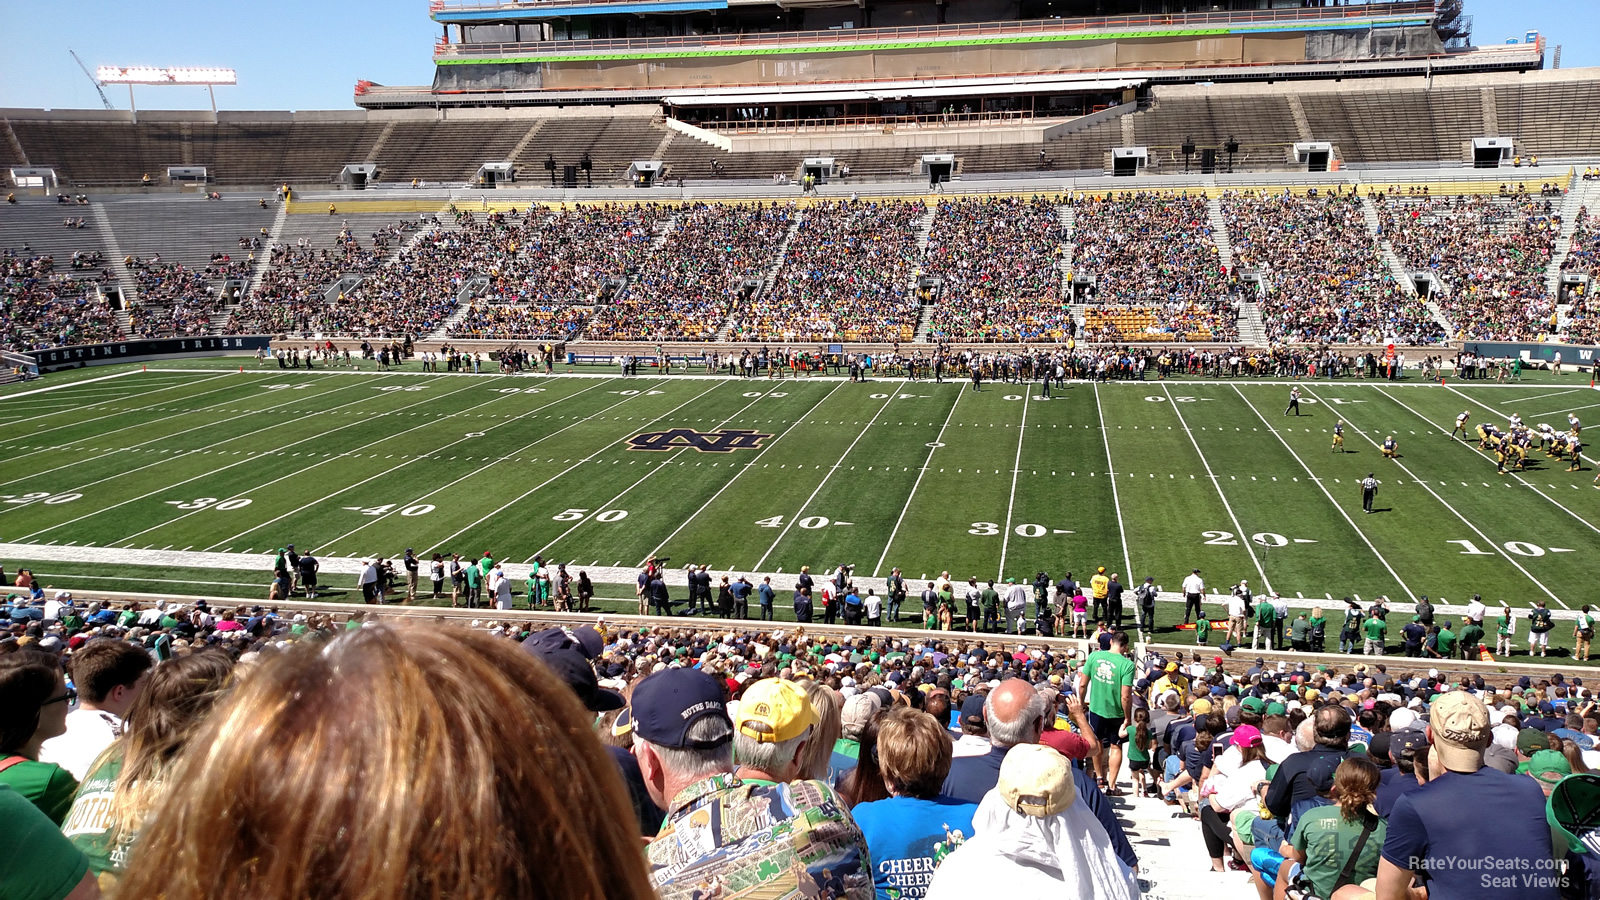 section 8, row 55 seat view  - notre dame stadium